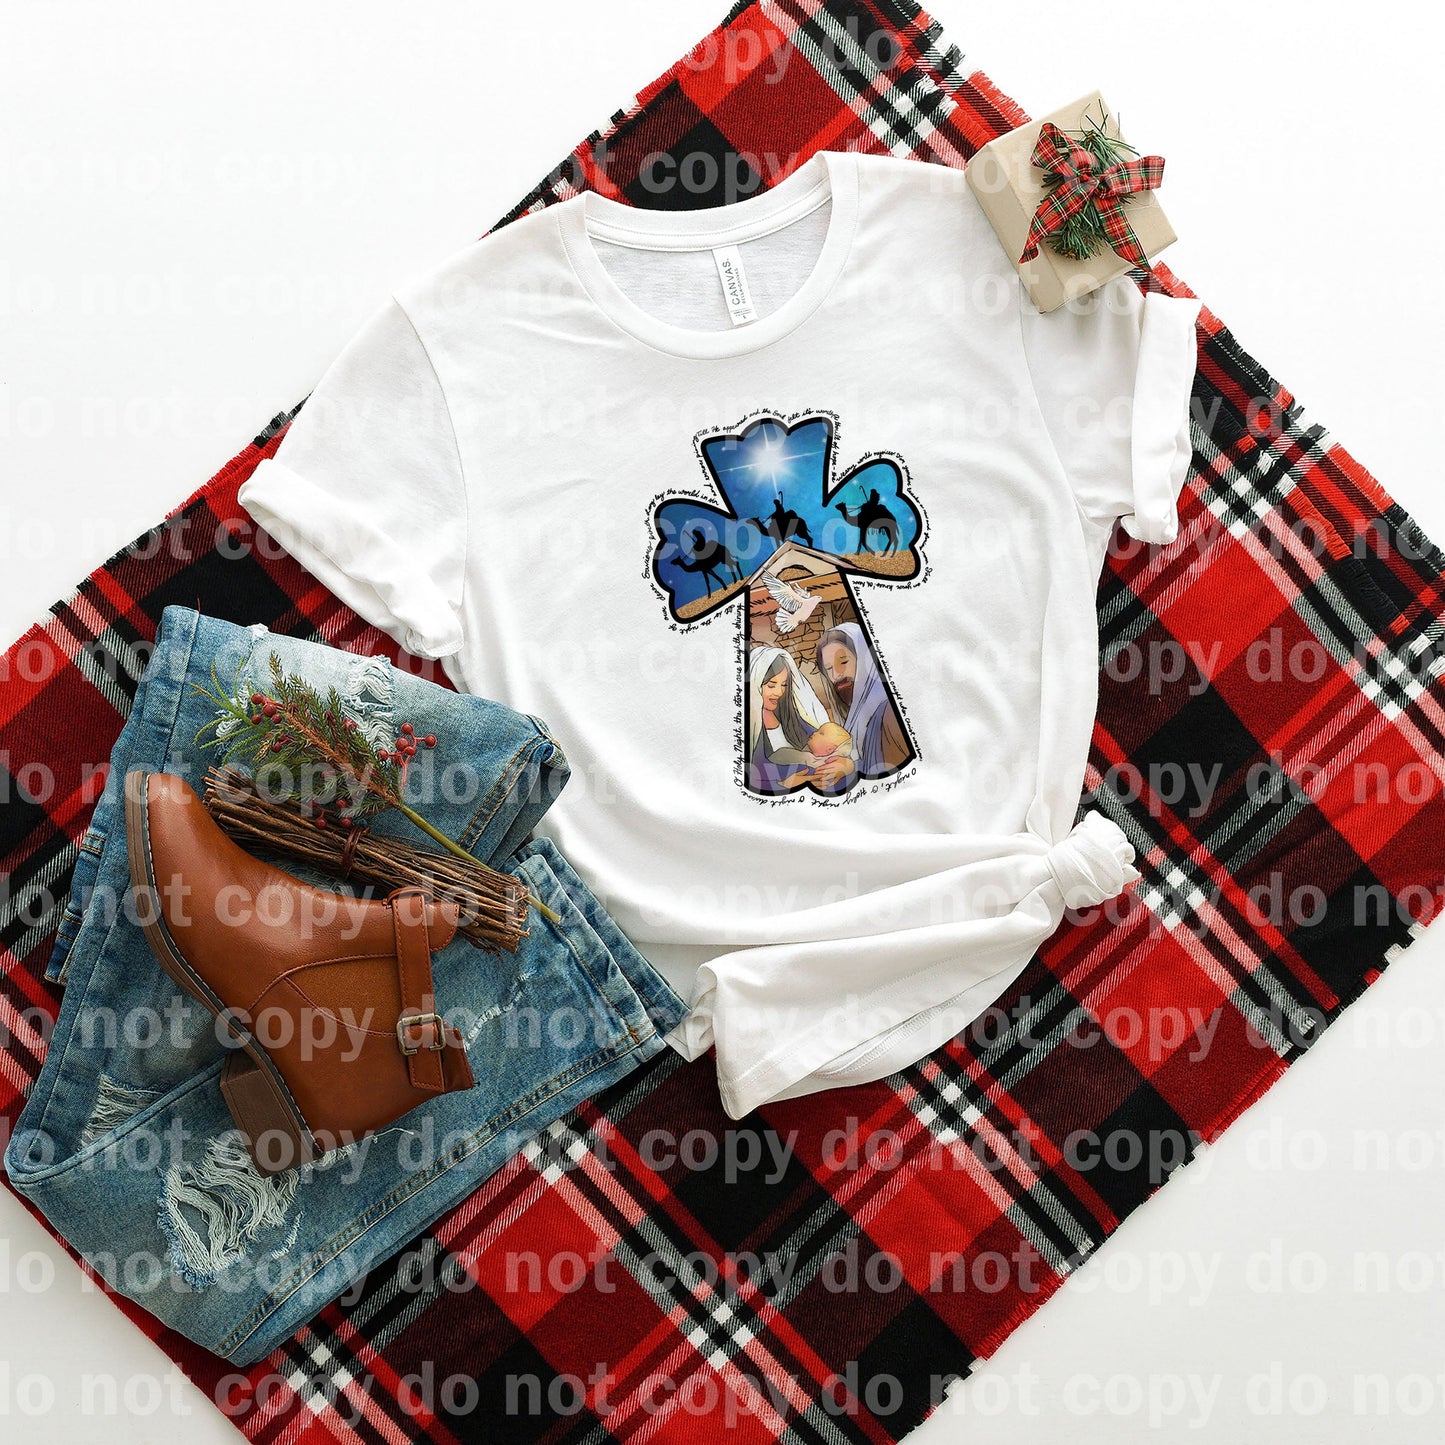 Holy Night Cross Dream Print or Sublimation Print